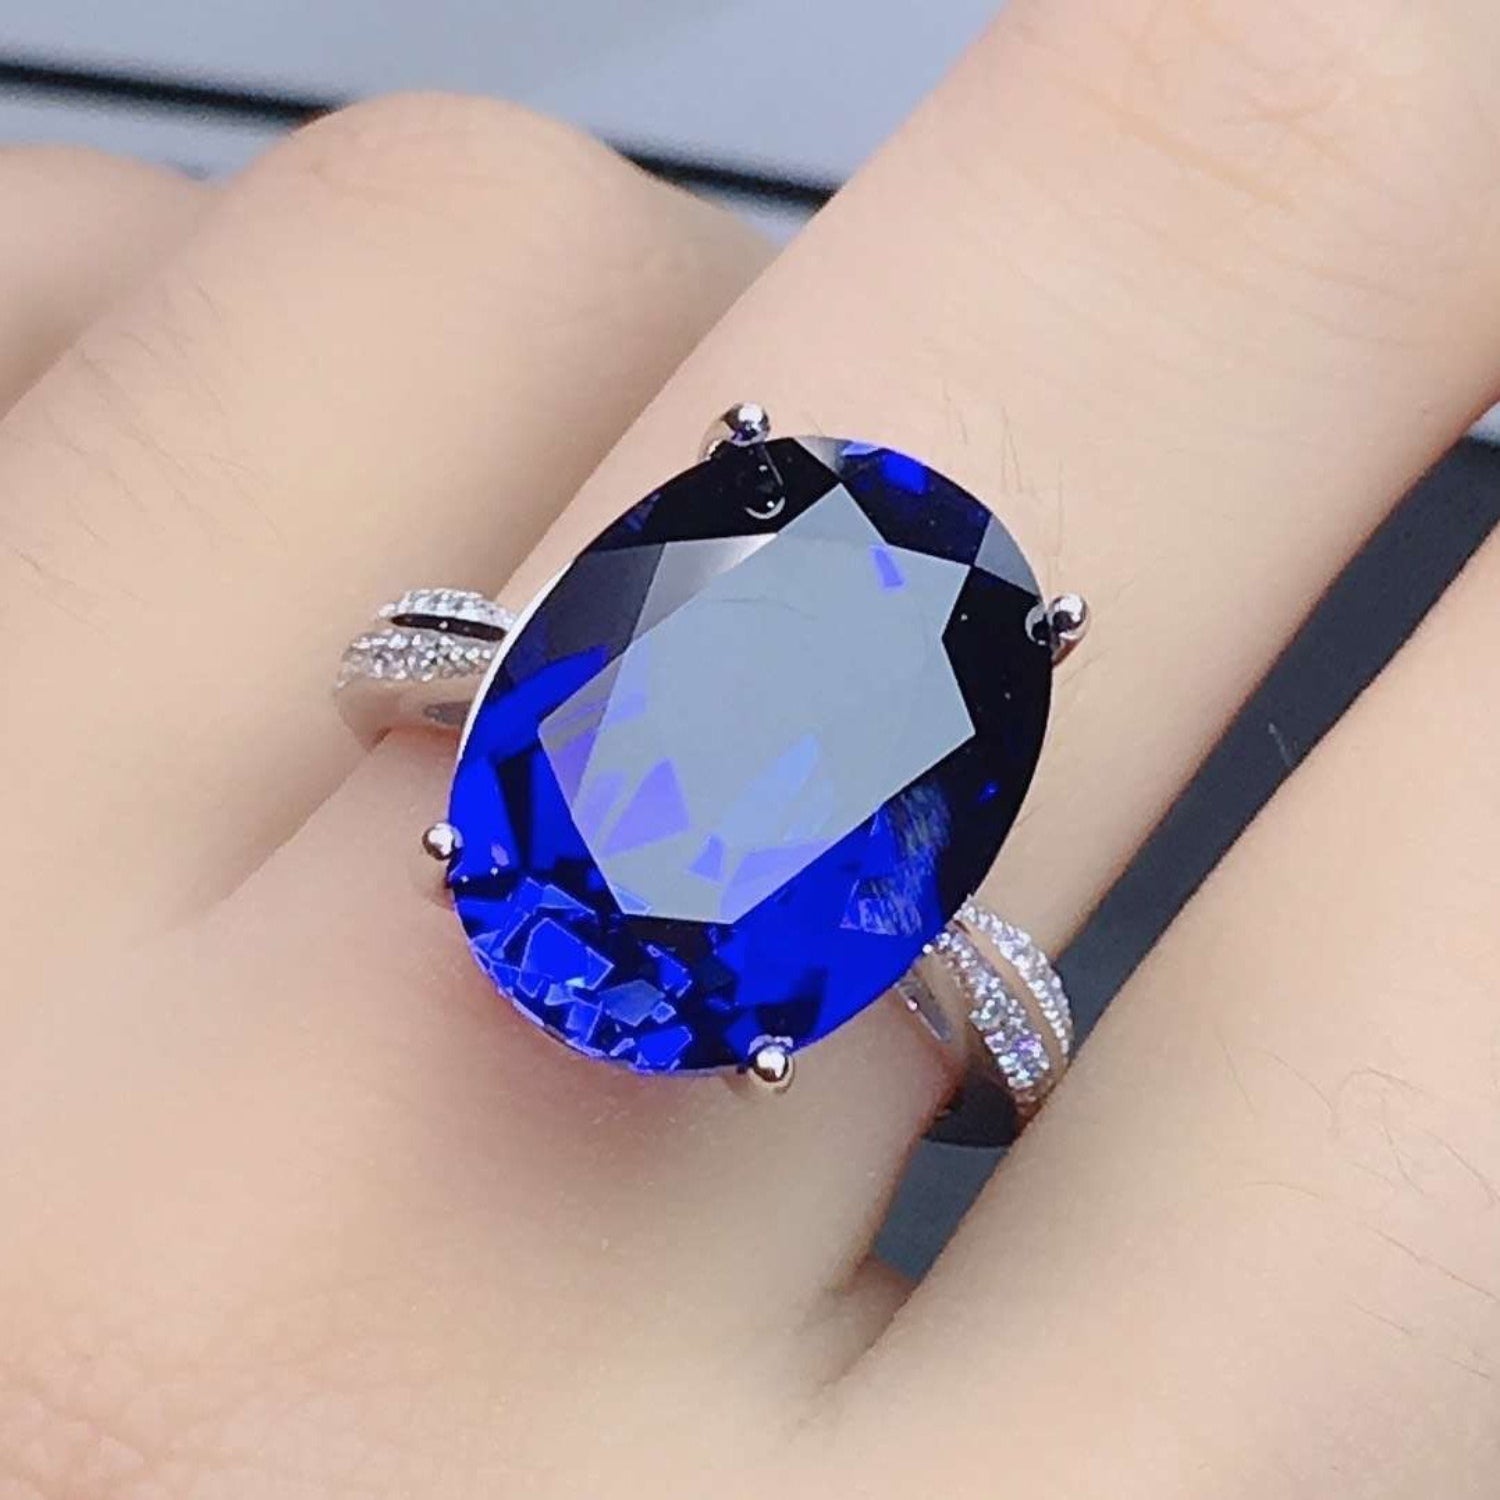 Platinum-Plated Artificial Gemstone Ring - Tophatter Shopping Deals - Electronics, Jewelry, Beauty, Health, Gadgets, Fashion